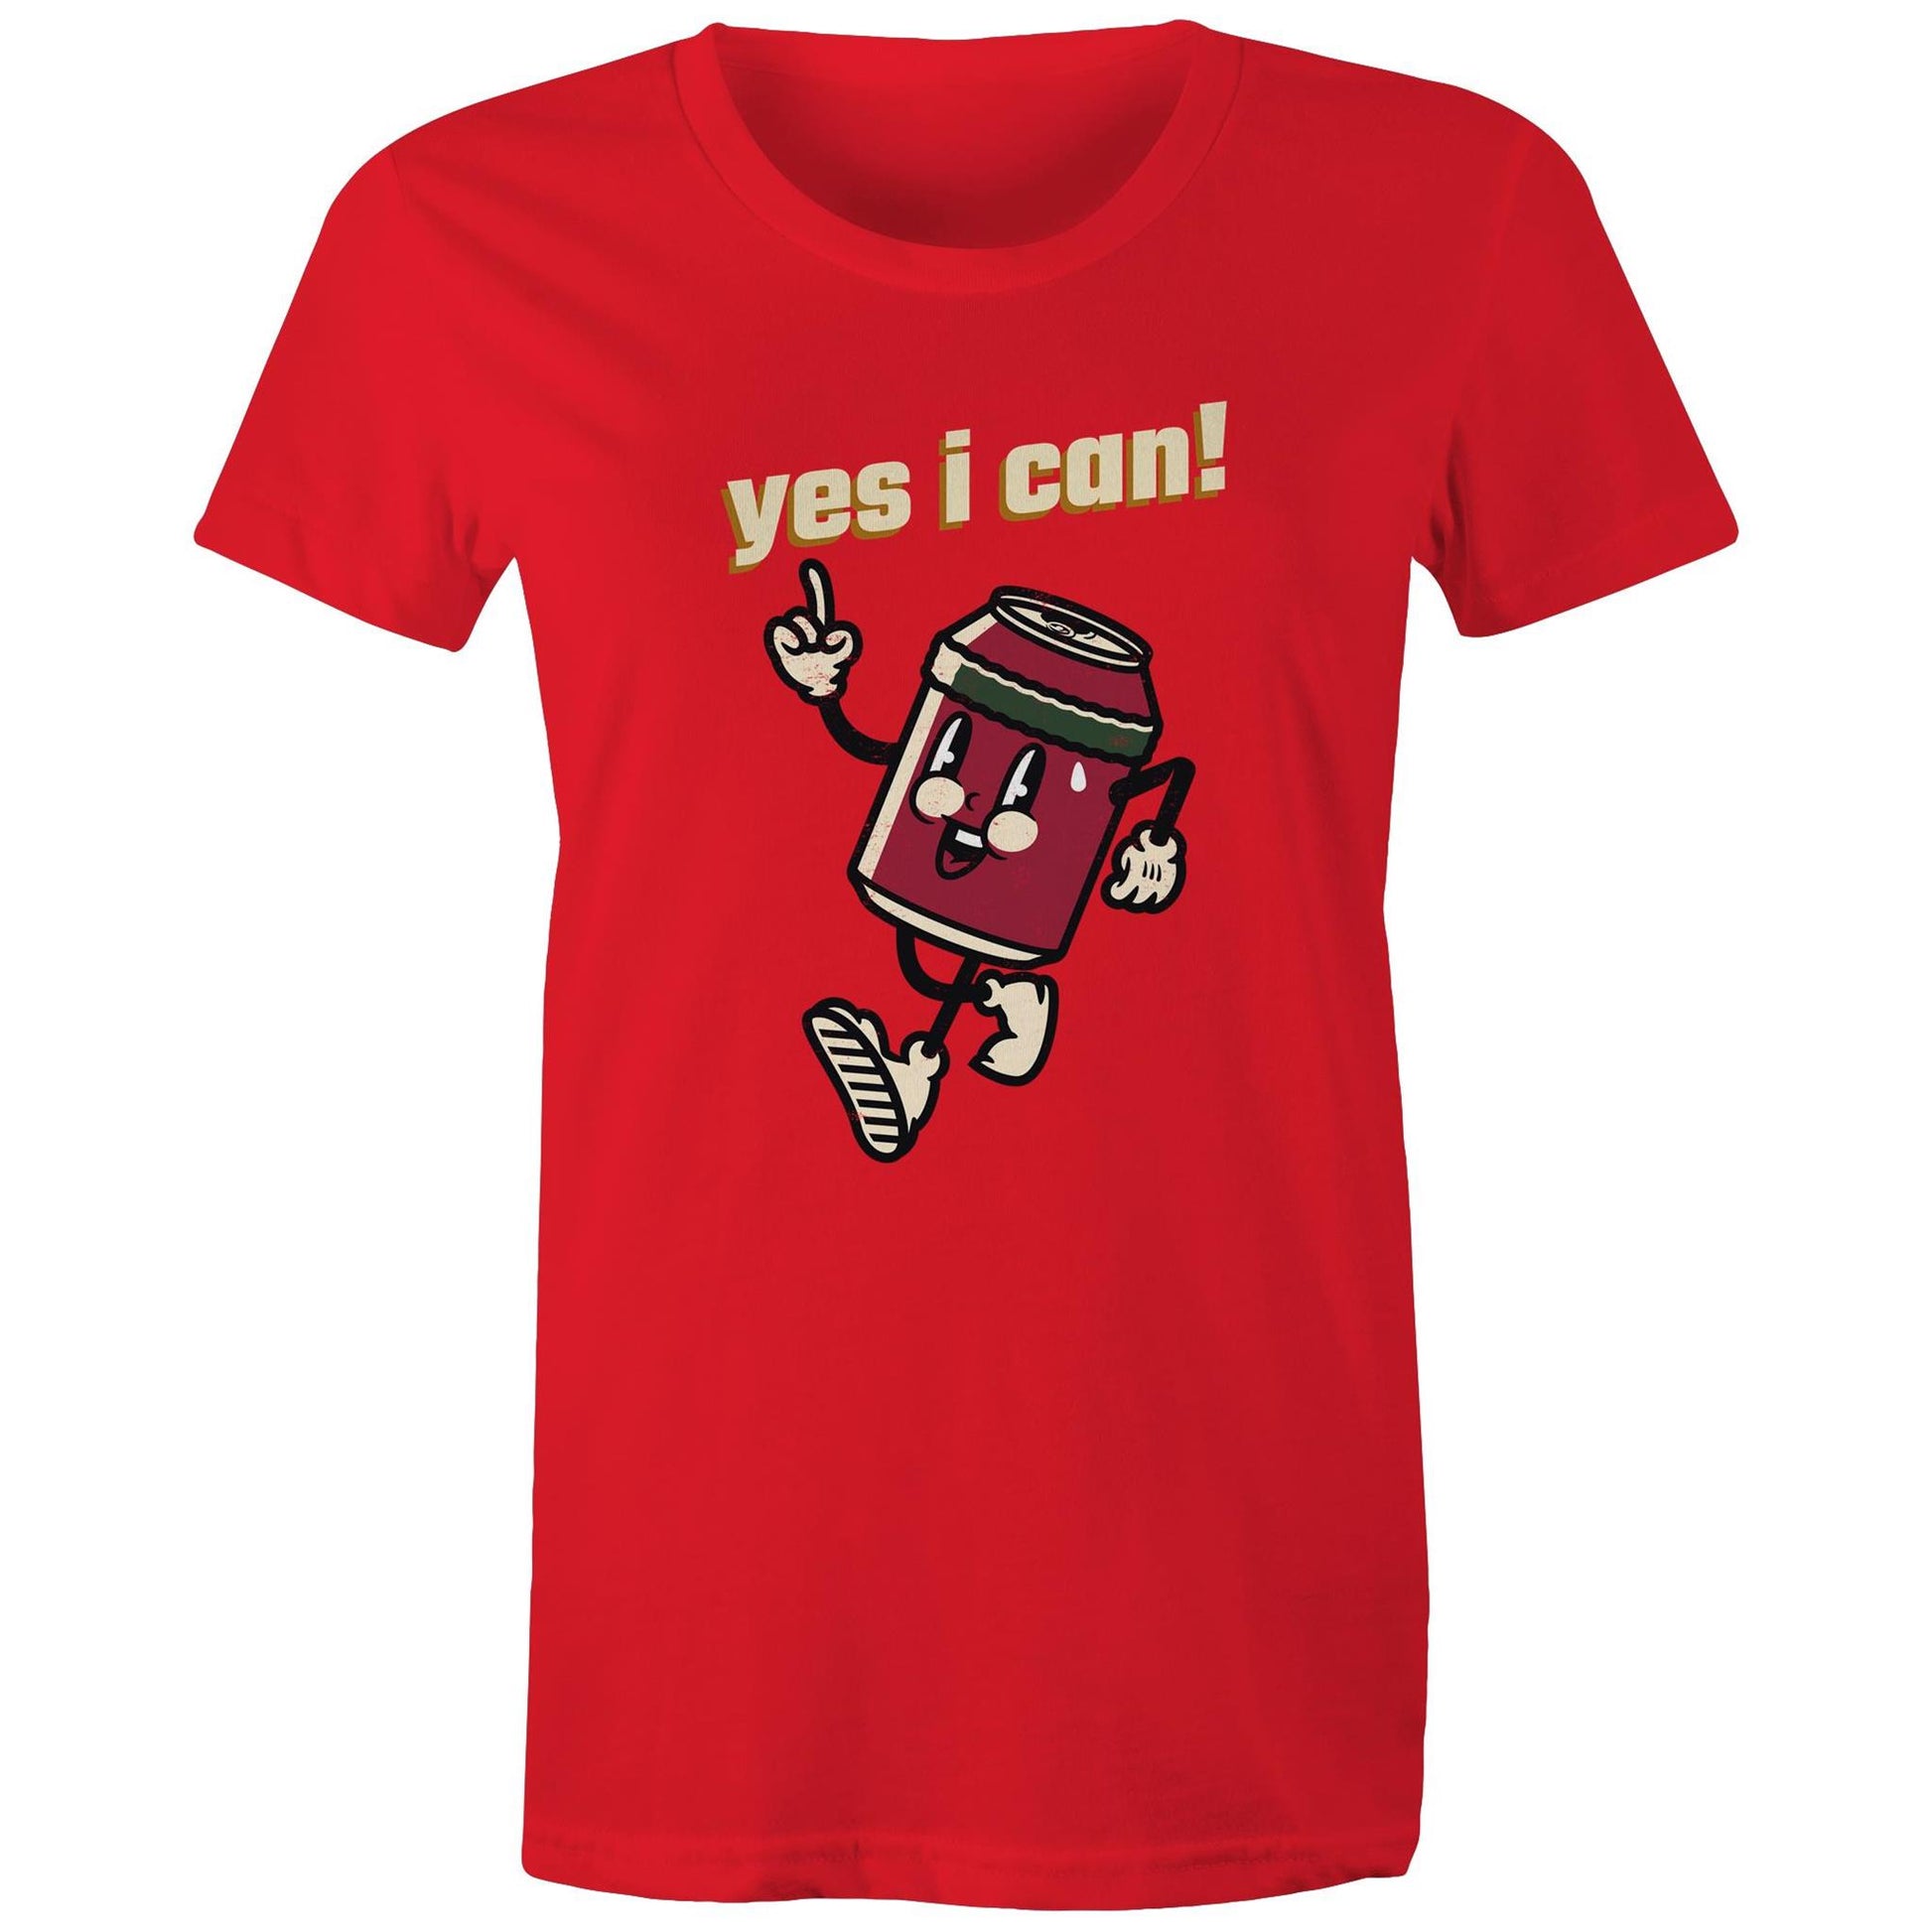 Yes I Can! - Womens T-shirt Red Womens T-shirt Motivation Retro